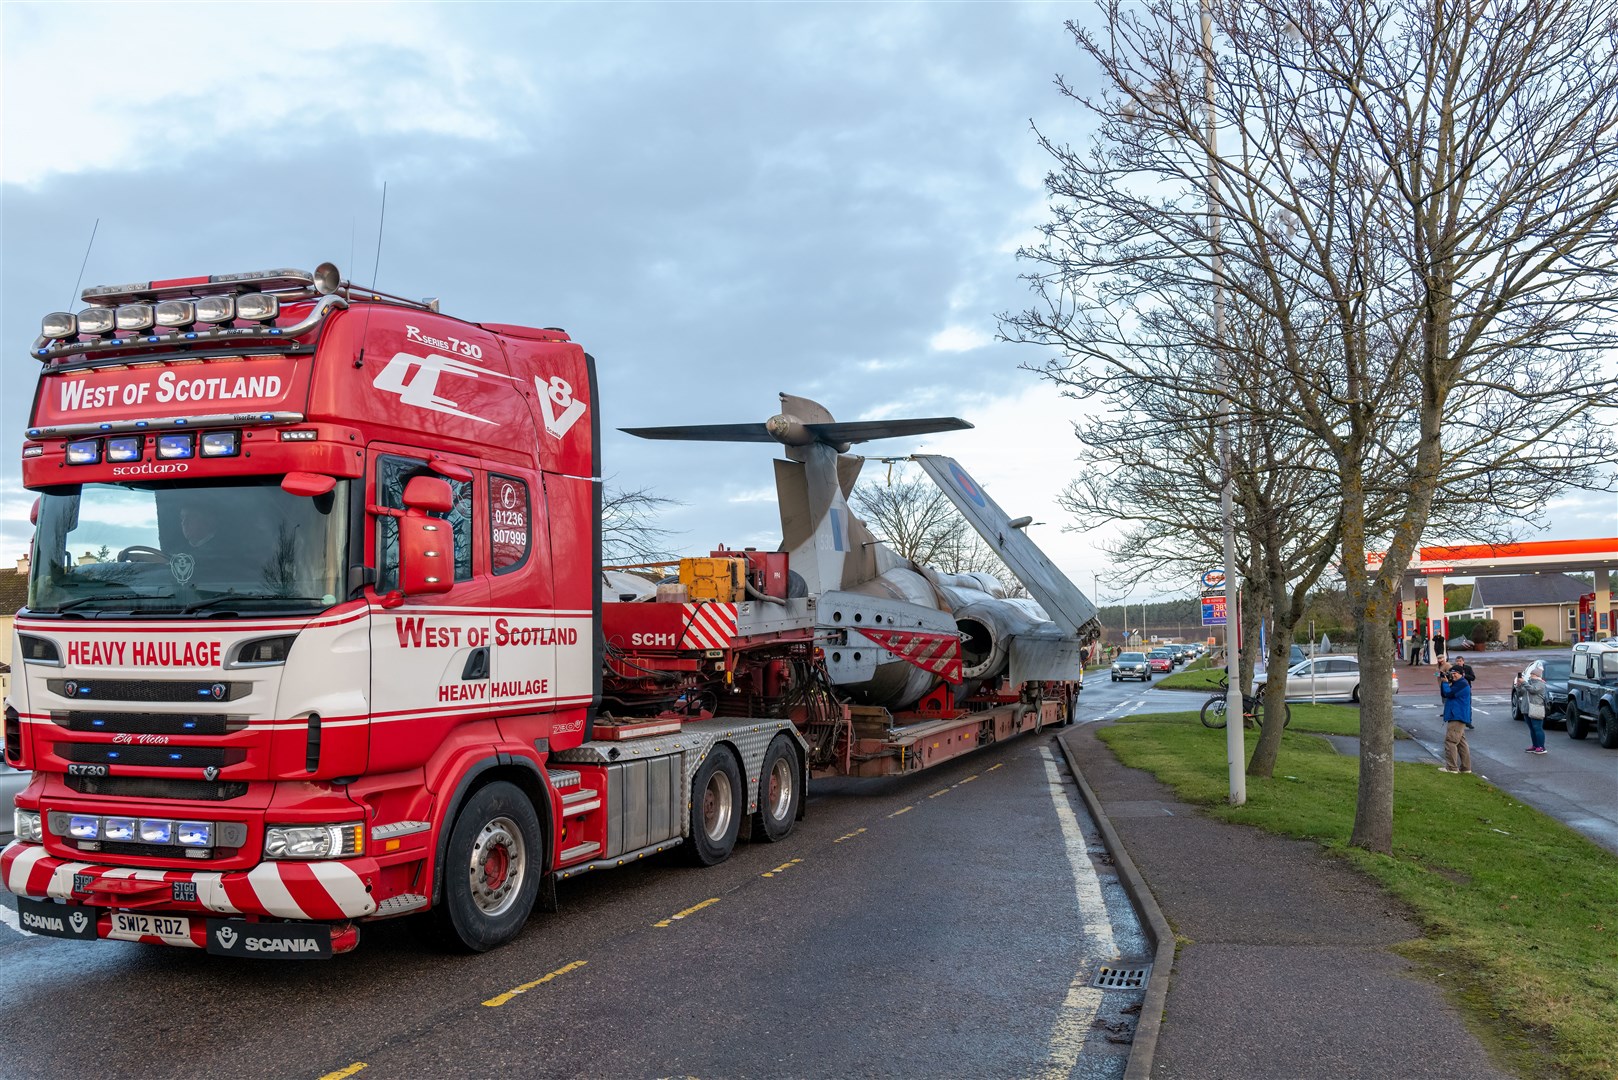 The Buccaneer jet, which has been located in Elgin since 1996, has been moved to its new home in Fife. Picture: JasperImage